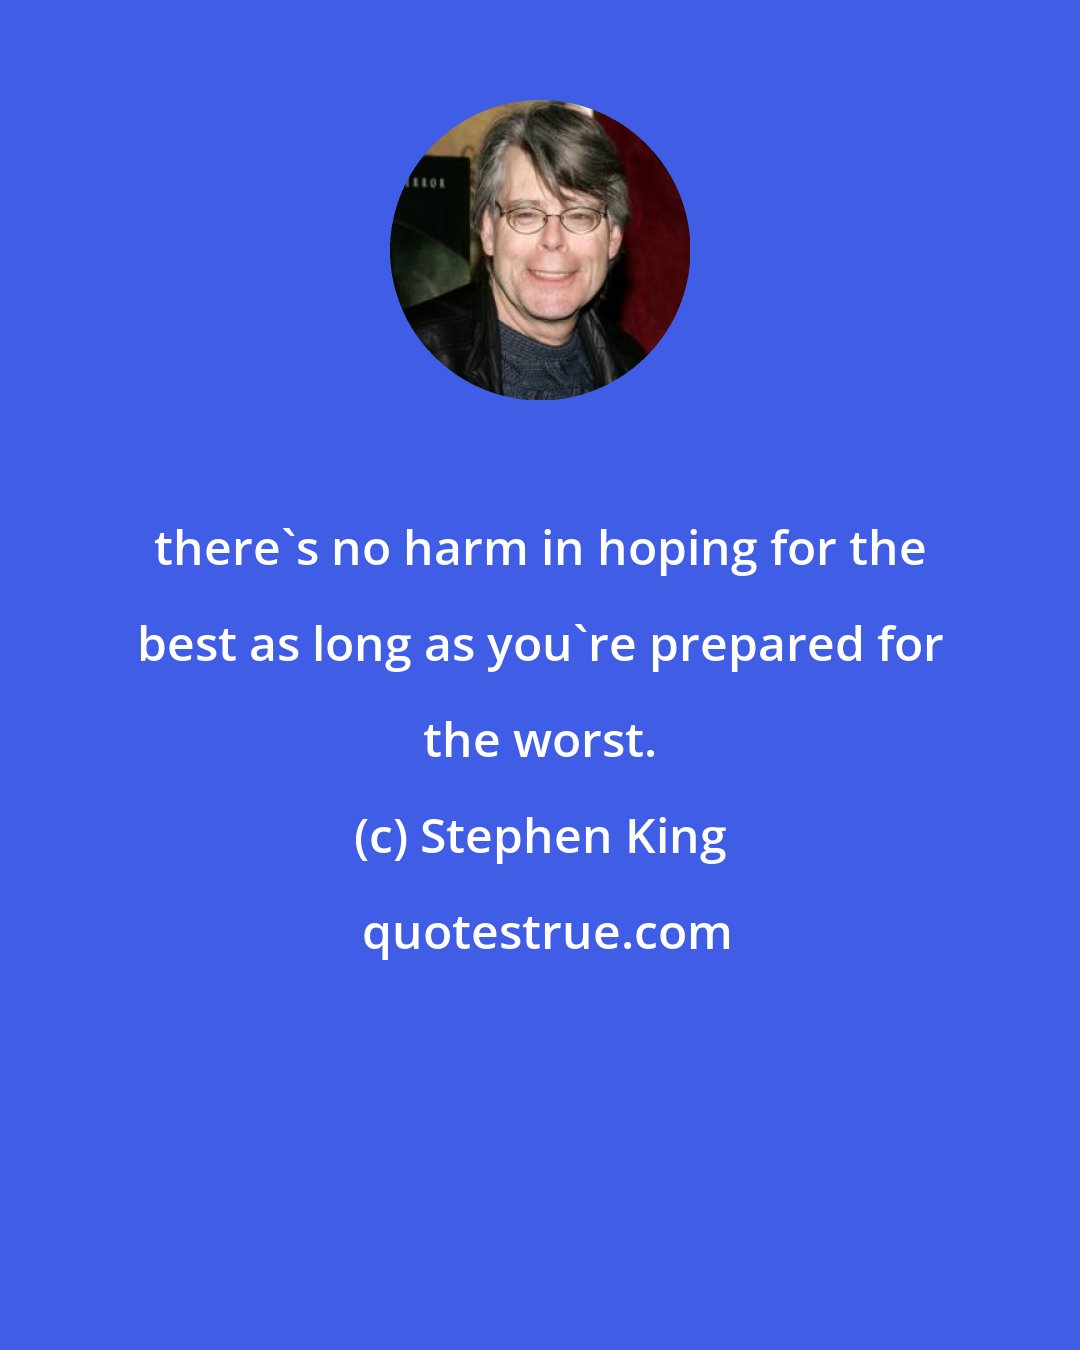 Stephen King: there's no harm in hoping for the best as long as you're prepared for the worst.